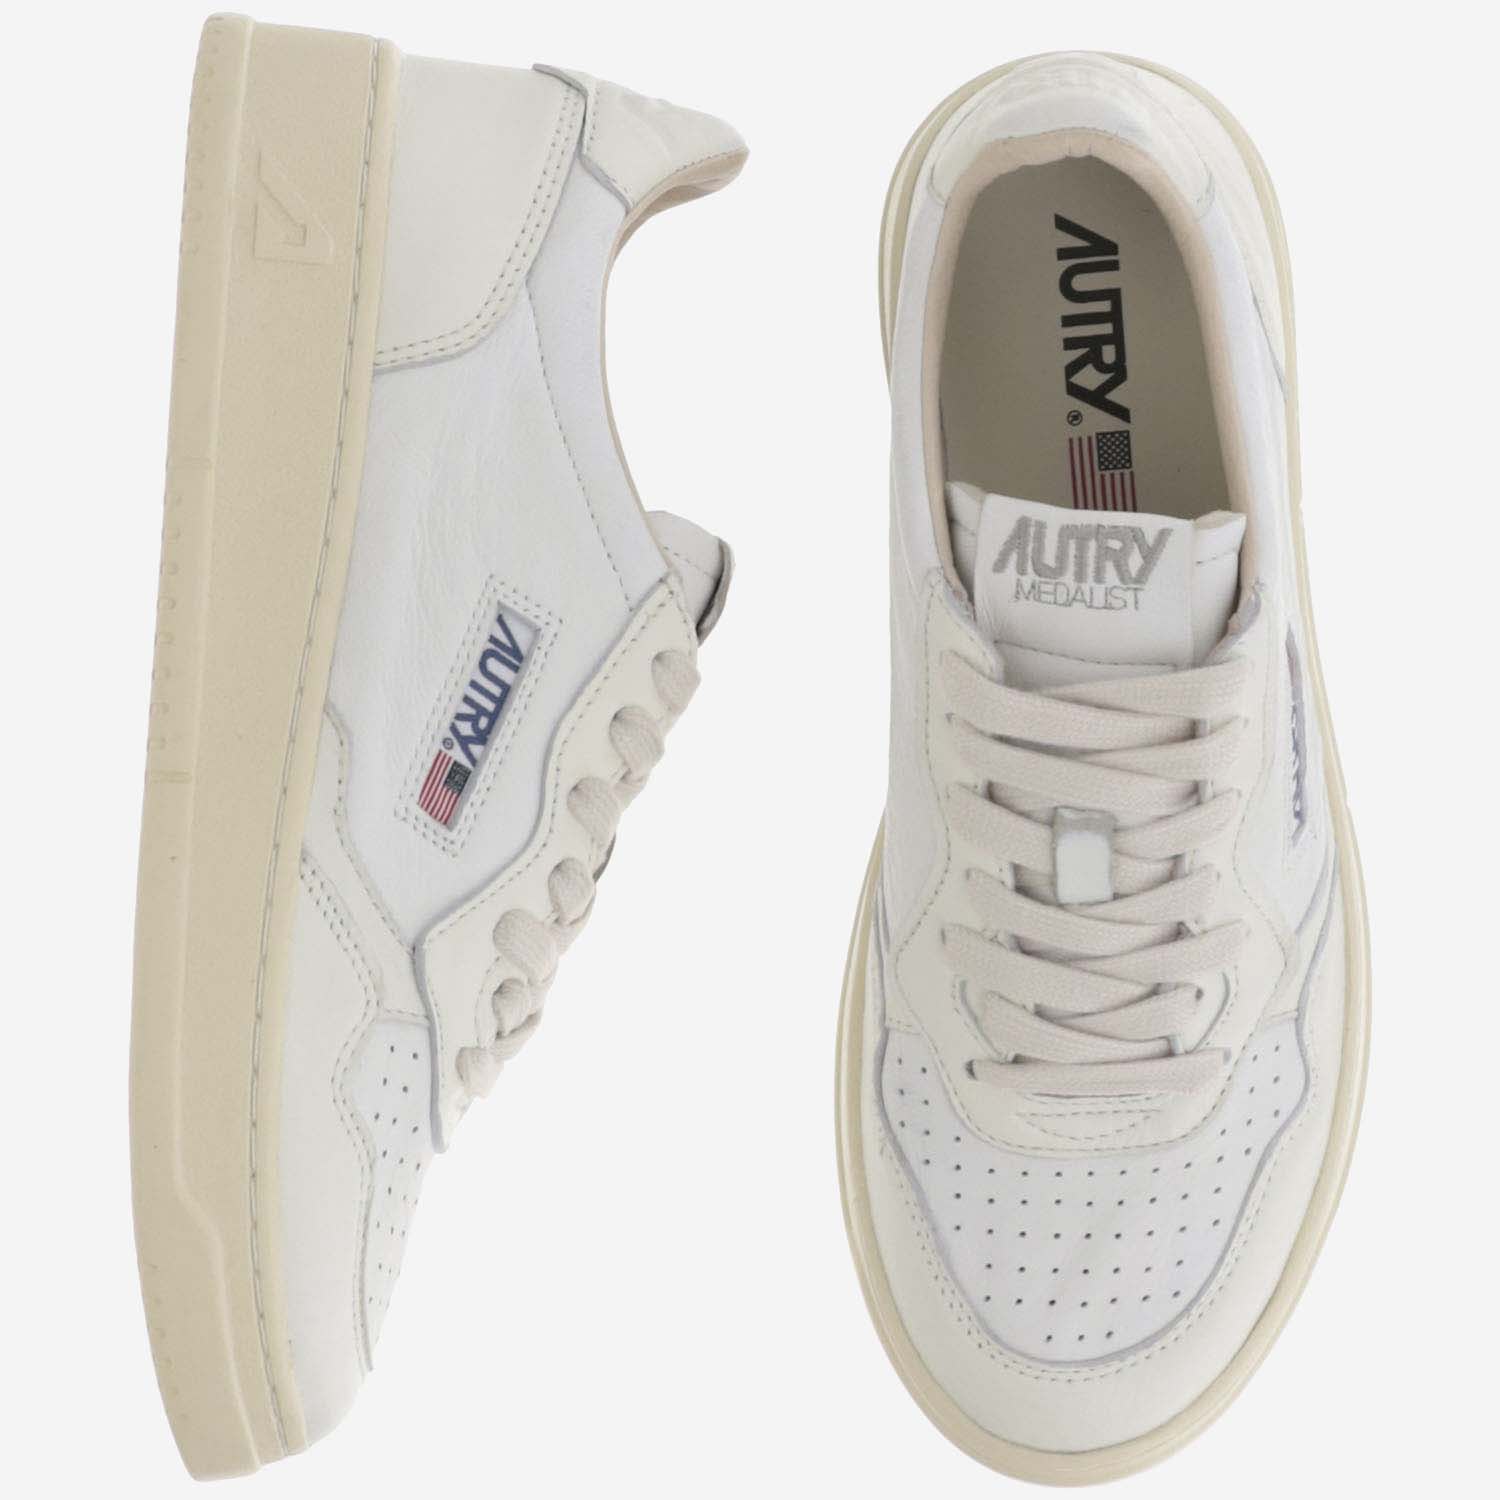 Shop Autry Medalist Leather Sneakers In Wht/wht